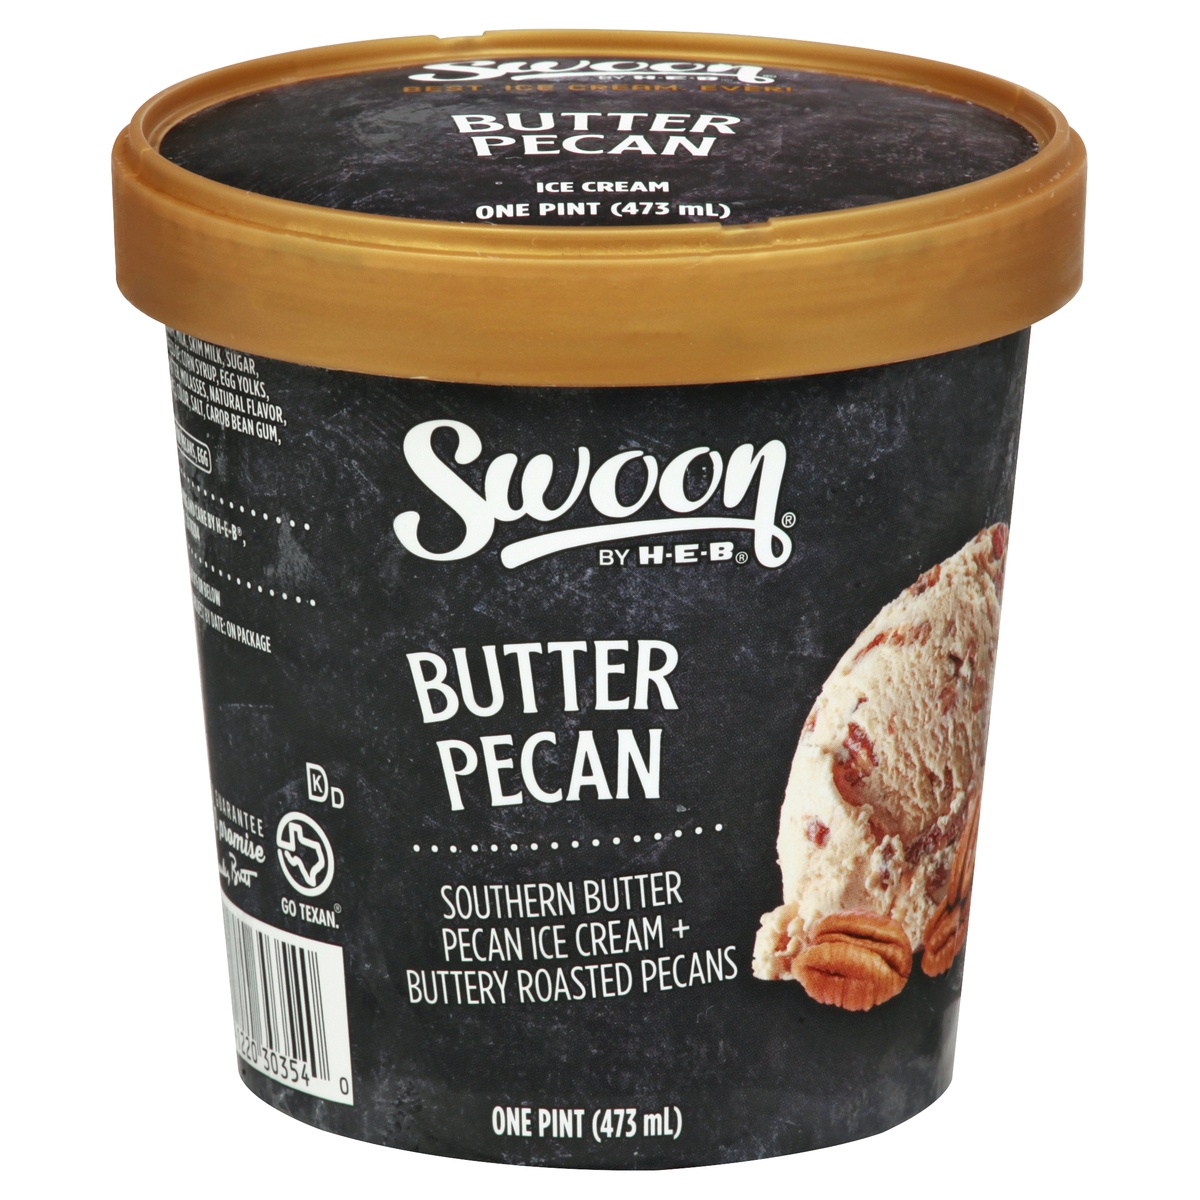 slide 1 of 1, Swoon by H-E-B Butter Pecan Ice Cream, 1 pint